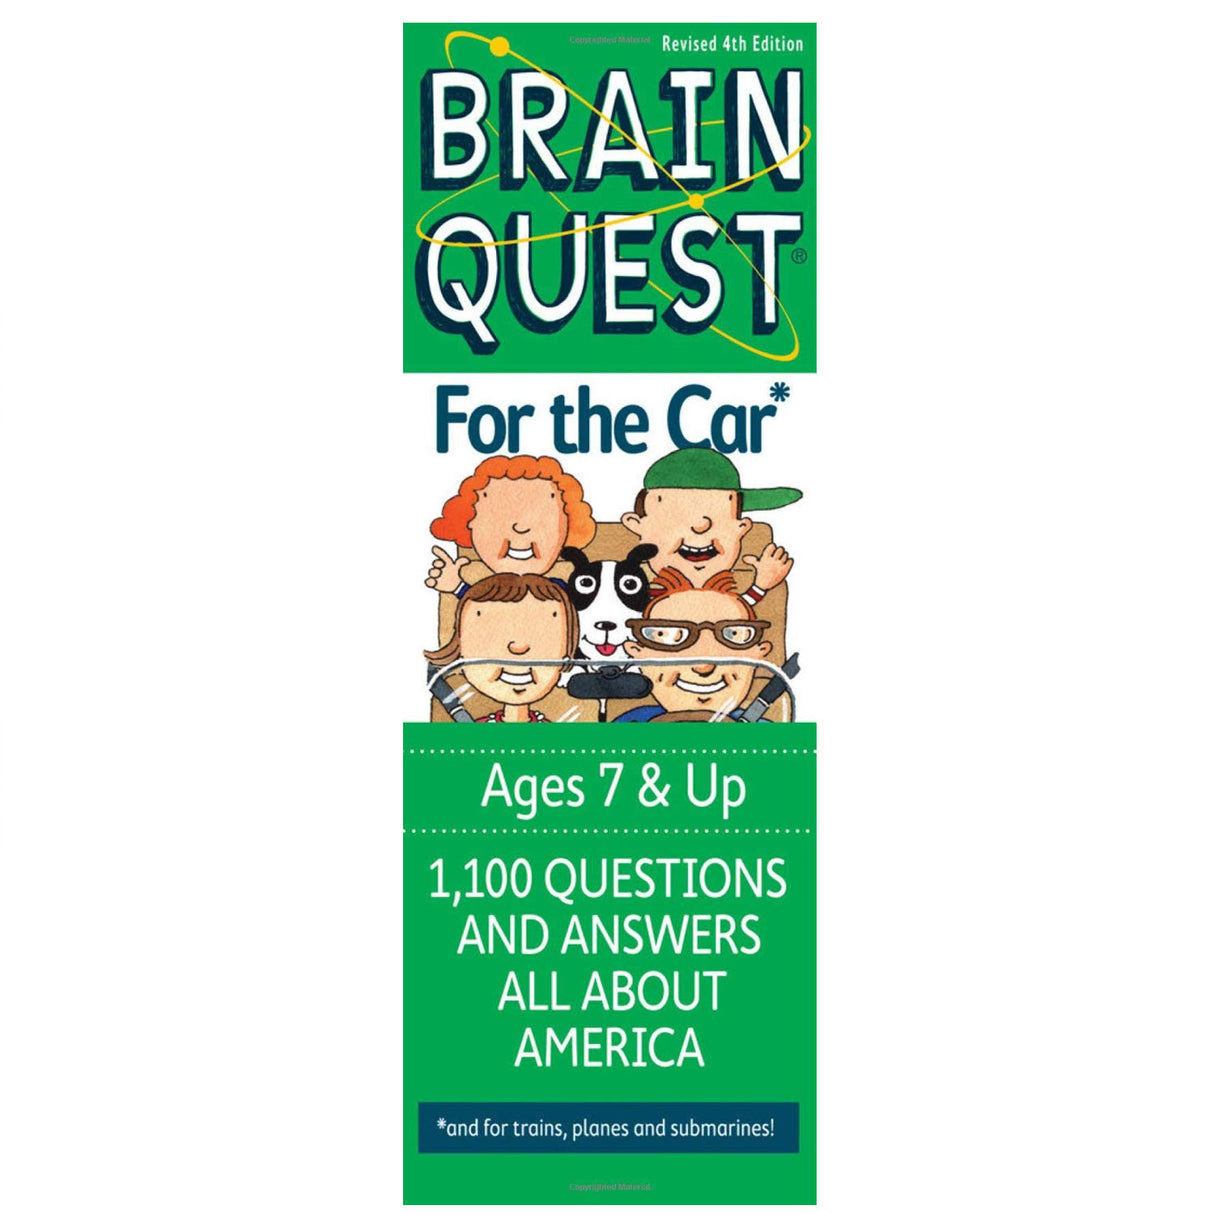 Brain Quest For the Car